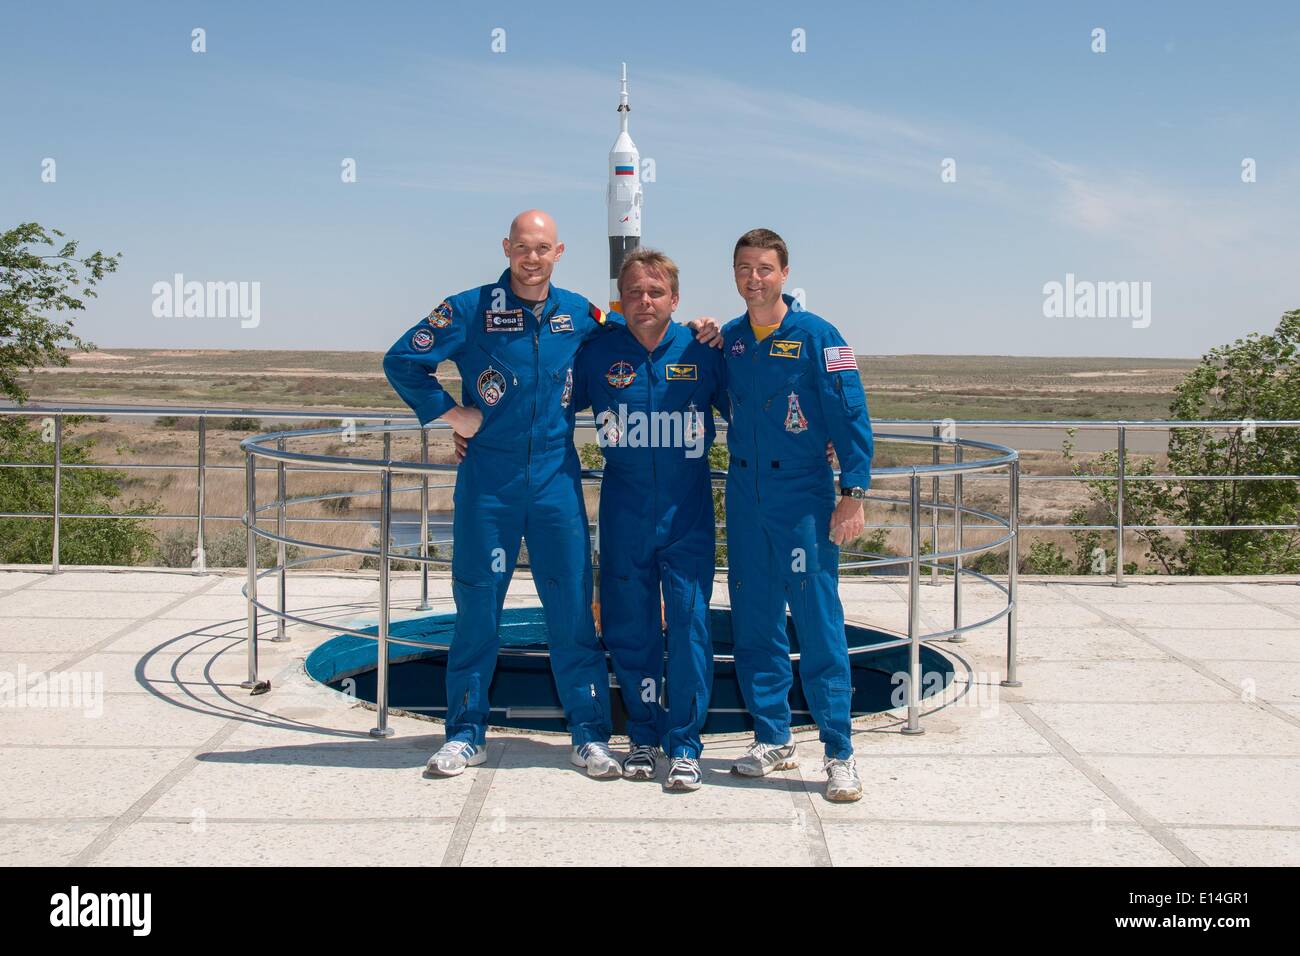 ISS Expedition 41 crews members stand for a group photo during pre-launch training May 21, 2014 in Baikonur, Kazakhstan. From left to right are Alexander Gerst of the European Space Agency , Soyuz Commander Max Suraev of Roscosmos and Flight Engineer Reid Wiseman of NASA. The crew will launch on May 29 in the Soyuz TMA-13M spacecraft from Baikonur for a 5 ½ month mission on the International Space Station. Stock Photo